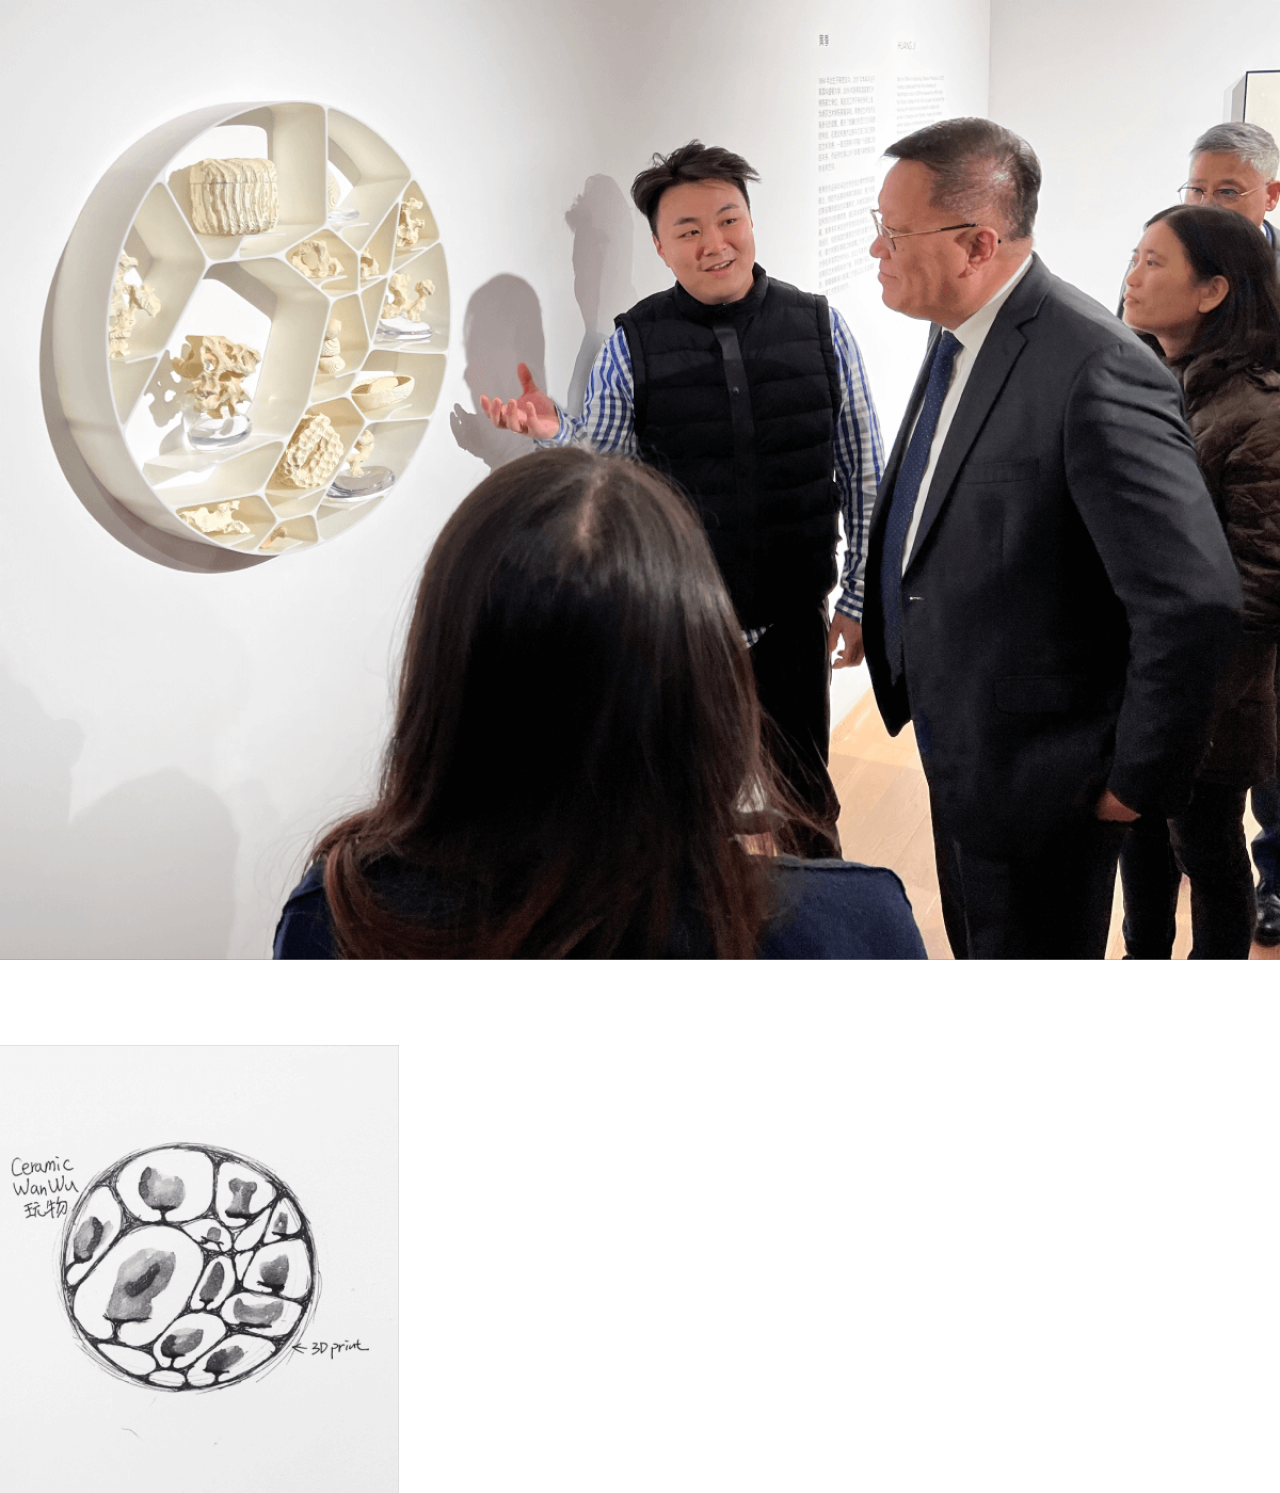 Ji Huang presents the piece which hangs on the gallery wall, to an onlooking group of visitors.